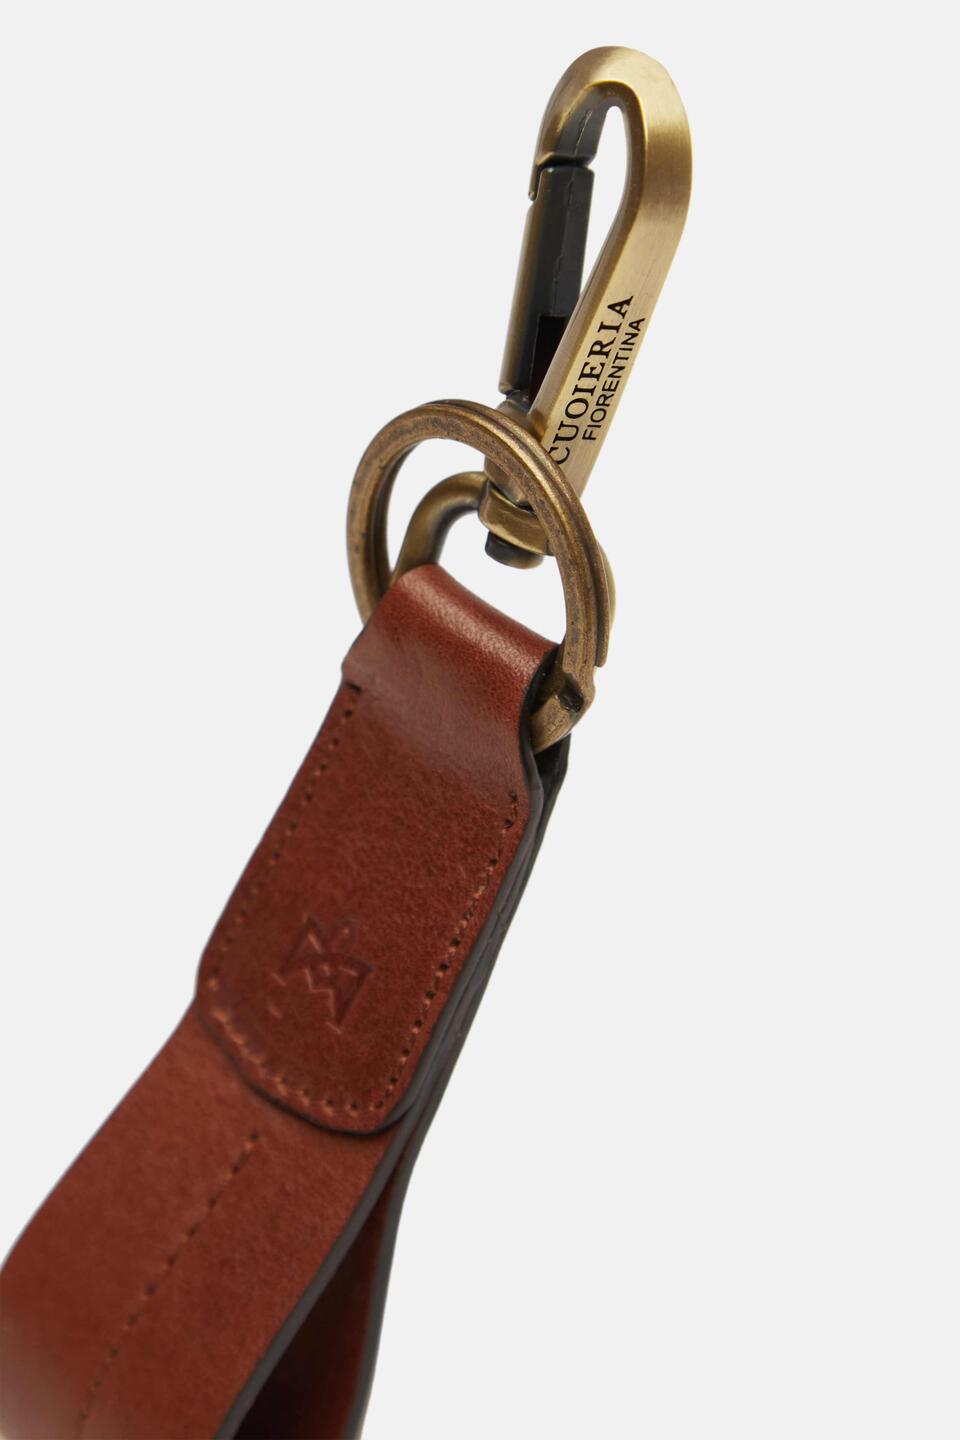 LEATHER KEYRING Brown  - Key Holders - Men's Accessories - Accessories - Cuoieria Fiorentina